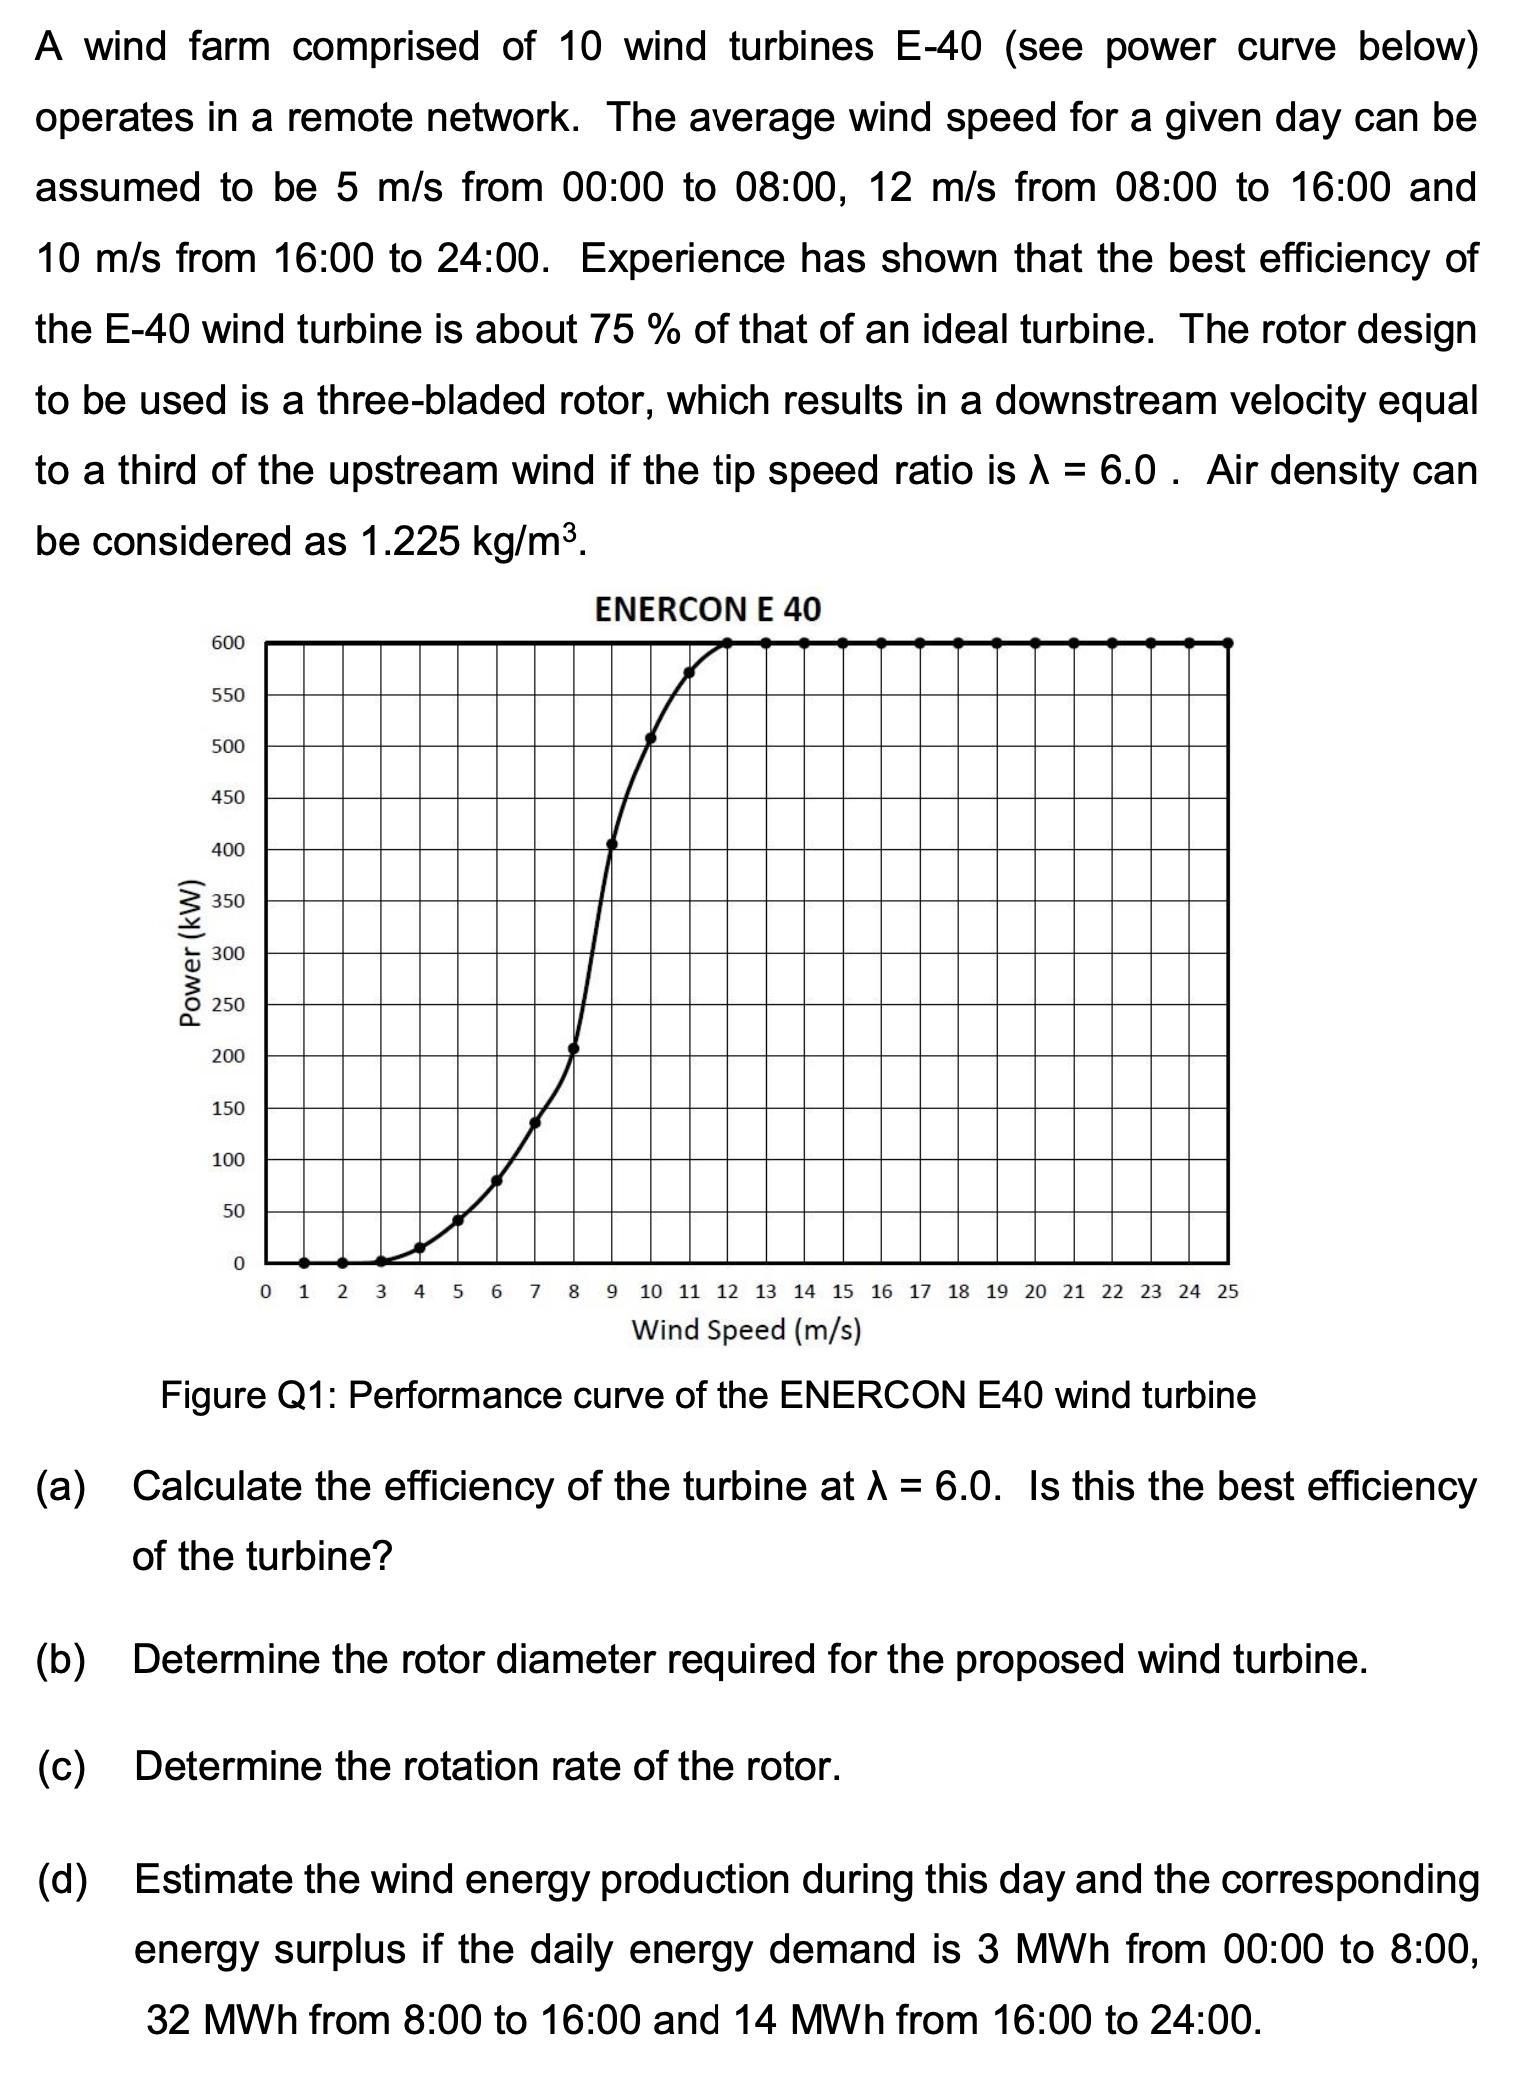 A wind farm comprised of 10 wind turbines E-40 (see power curve below) operates in a remote network. The